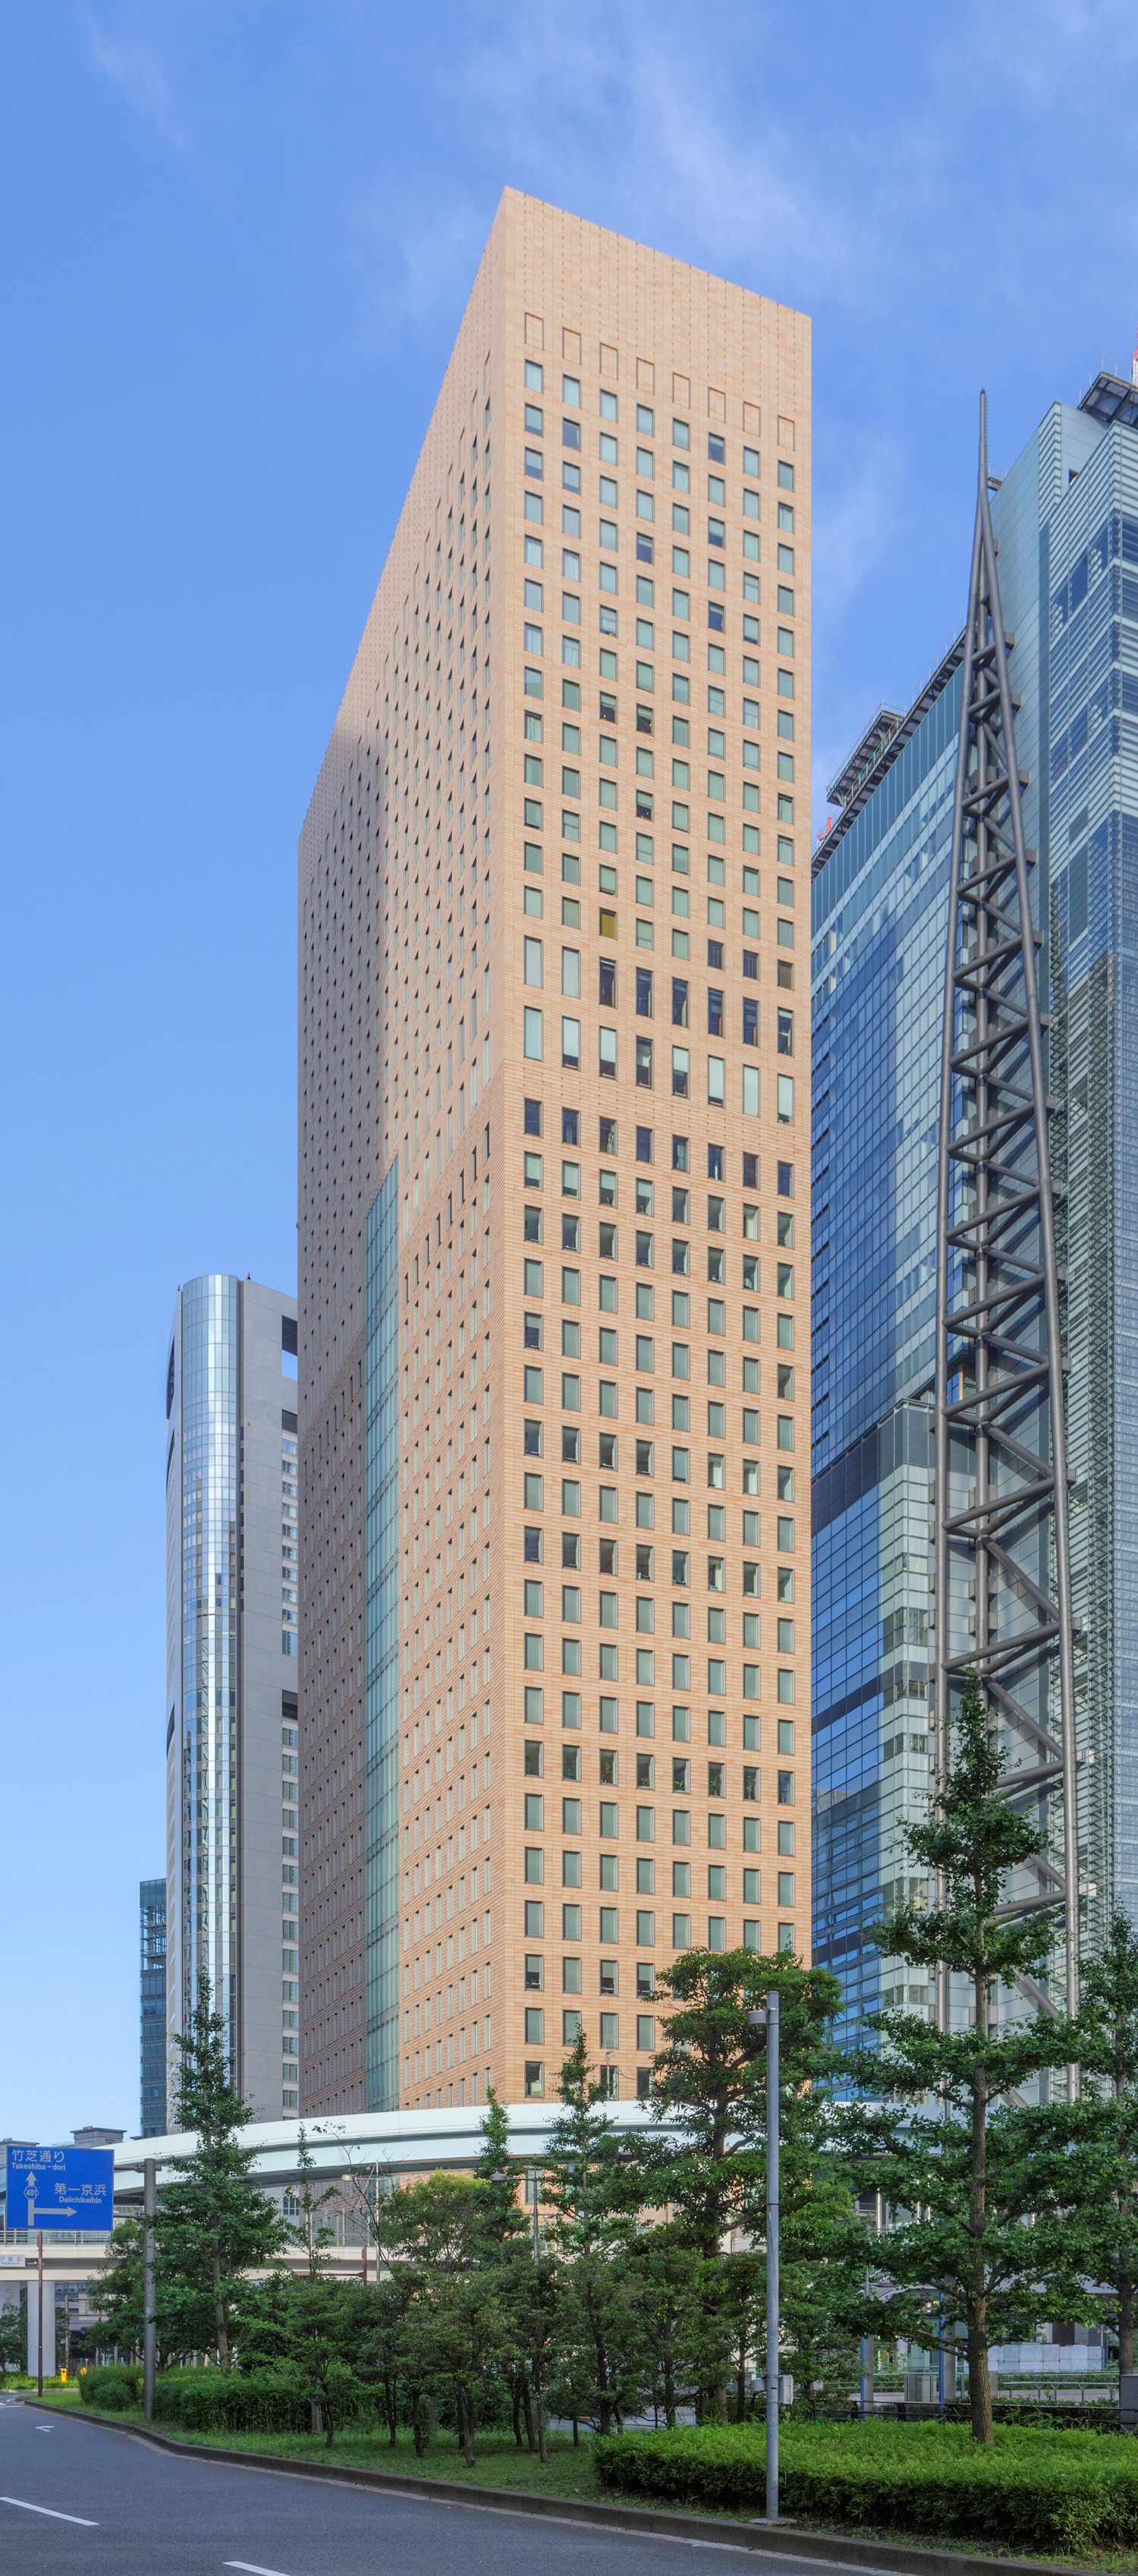 Royal Park Shiodome Tower, Tokyo - View from the northeast. © Mathias Beinling